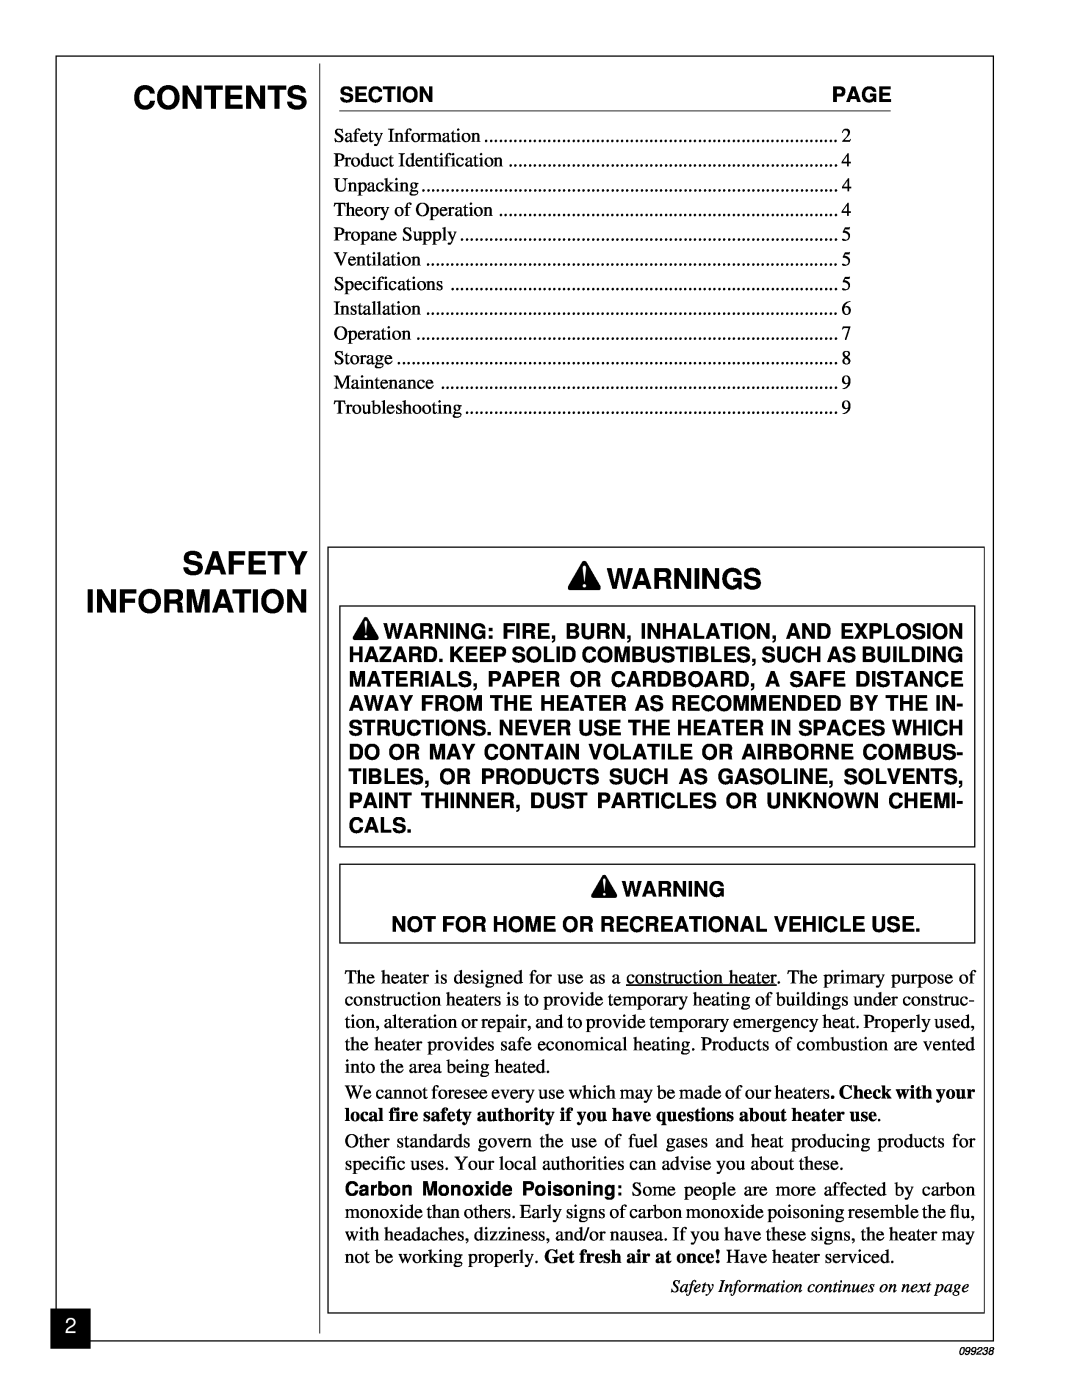 Homelite HP275 owner manual Contents Section, Safety, Information, Warnings, Page, Not For Home Or Recreational Vehicle Use 